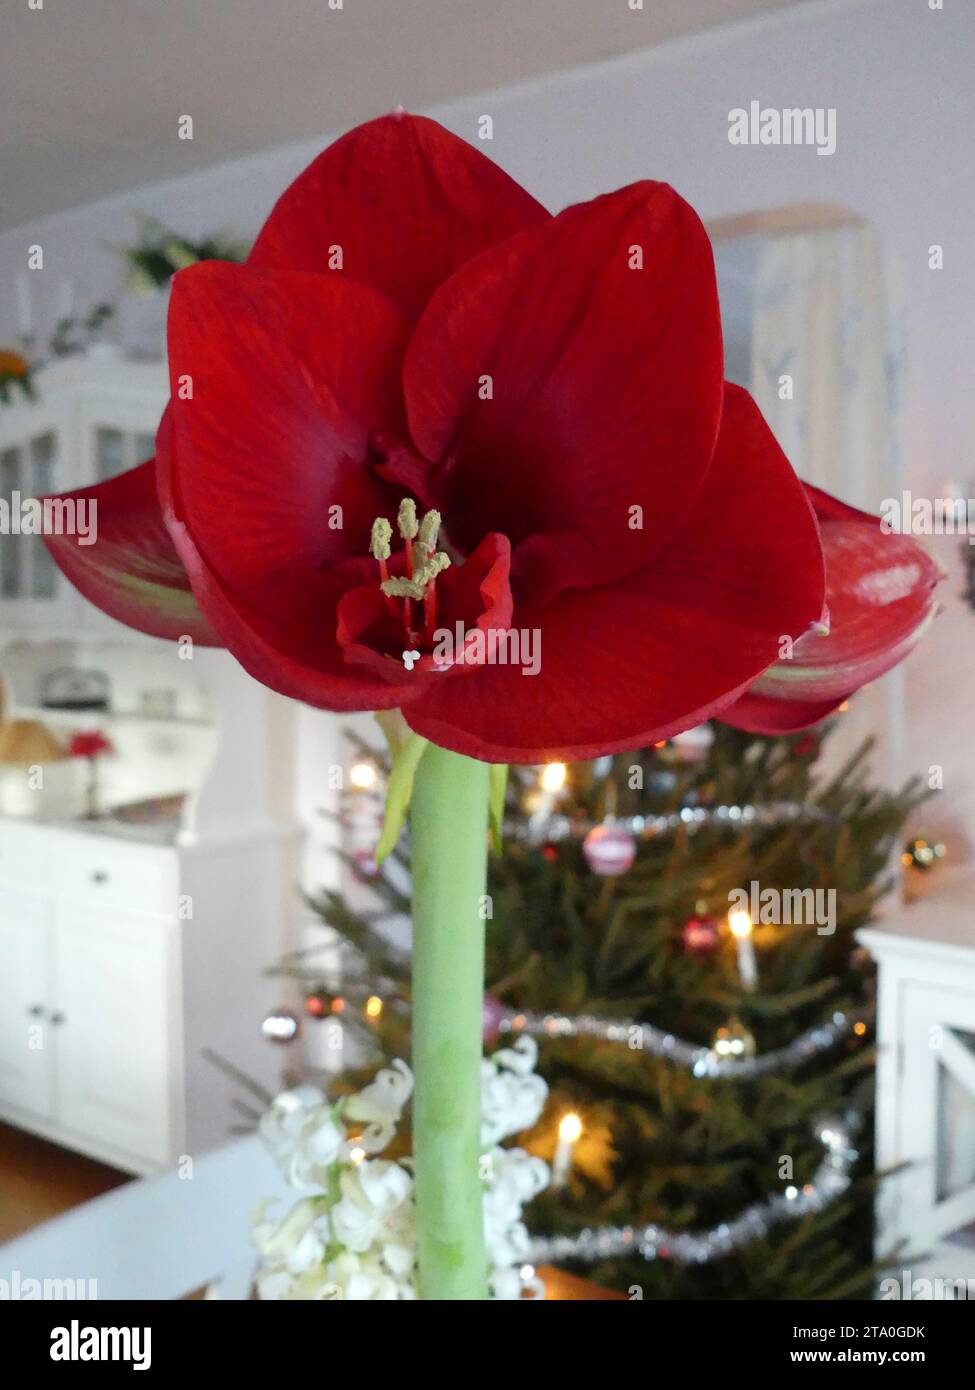 Red amaryllis in front of a dressed Christmas tree Stock Photo